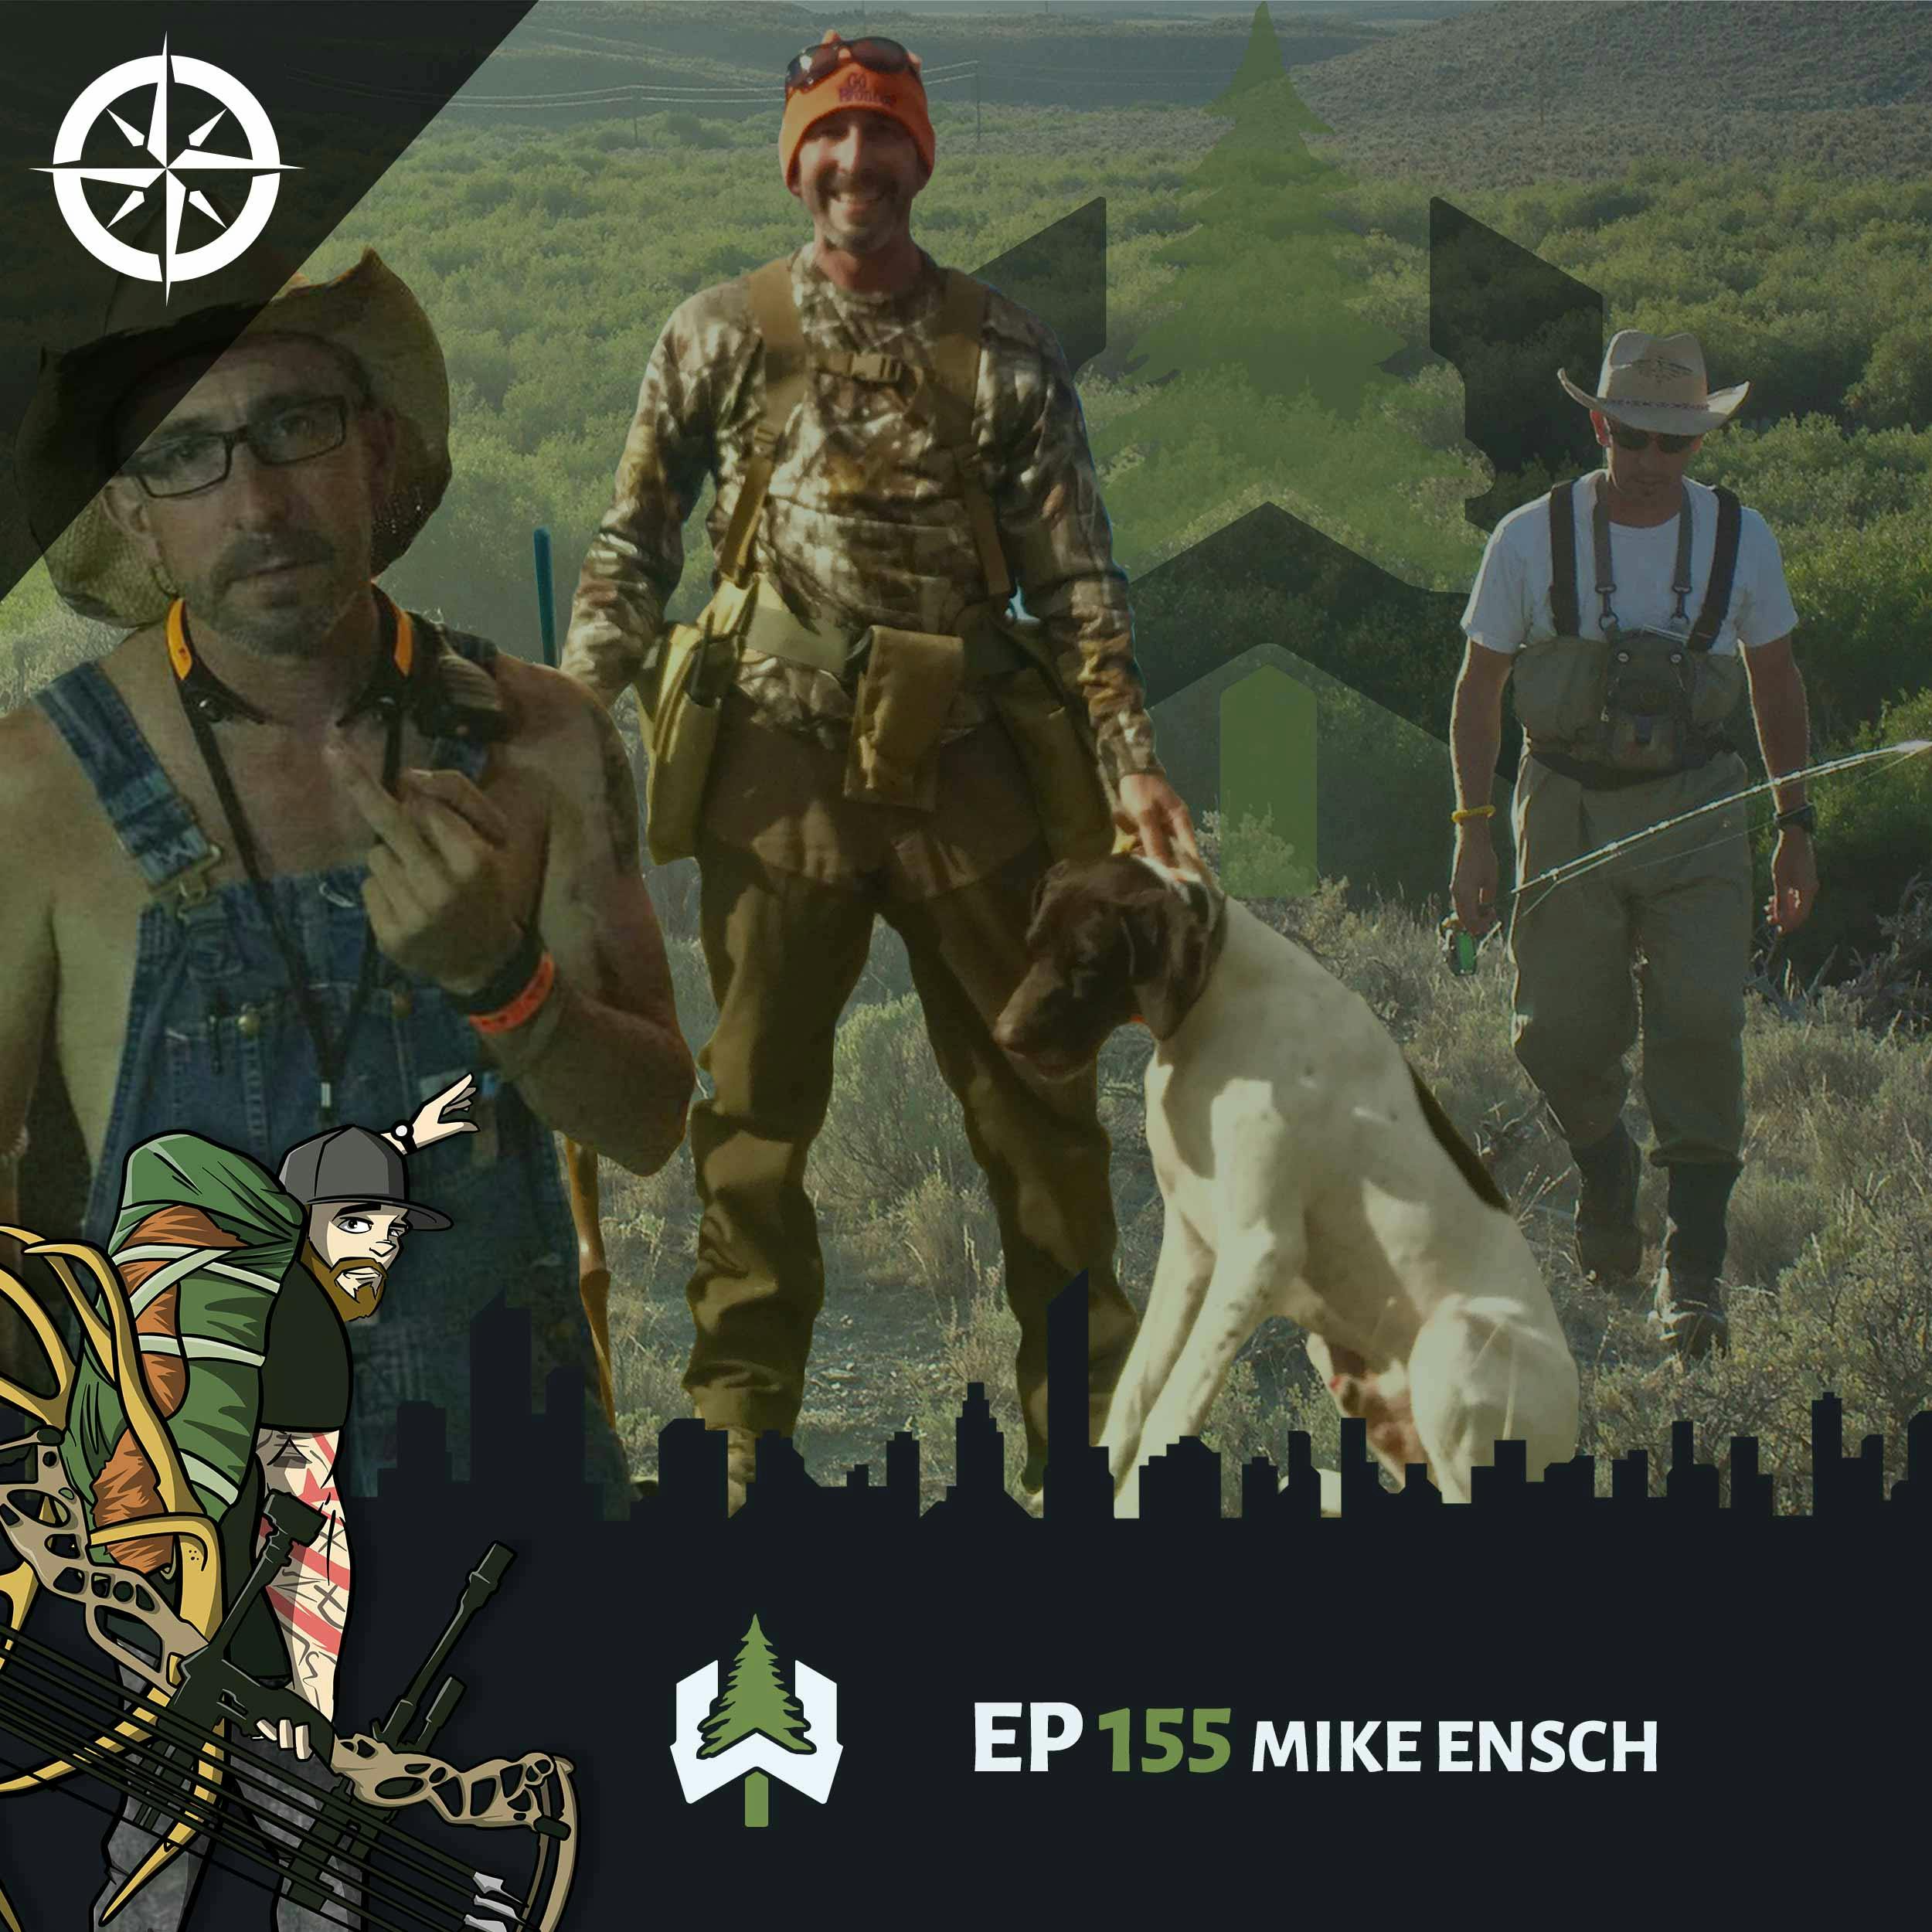 Ep 155 - Mike Ensch: Catching Up With a Hunting Buddy